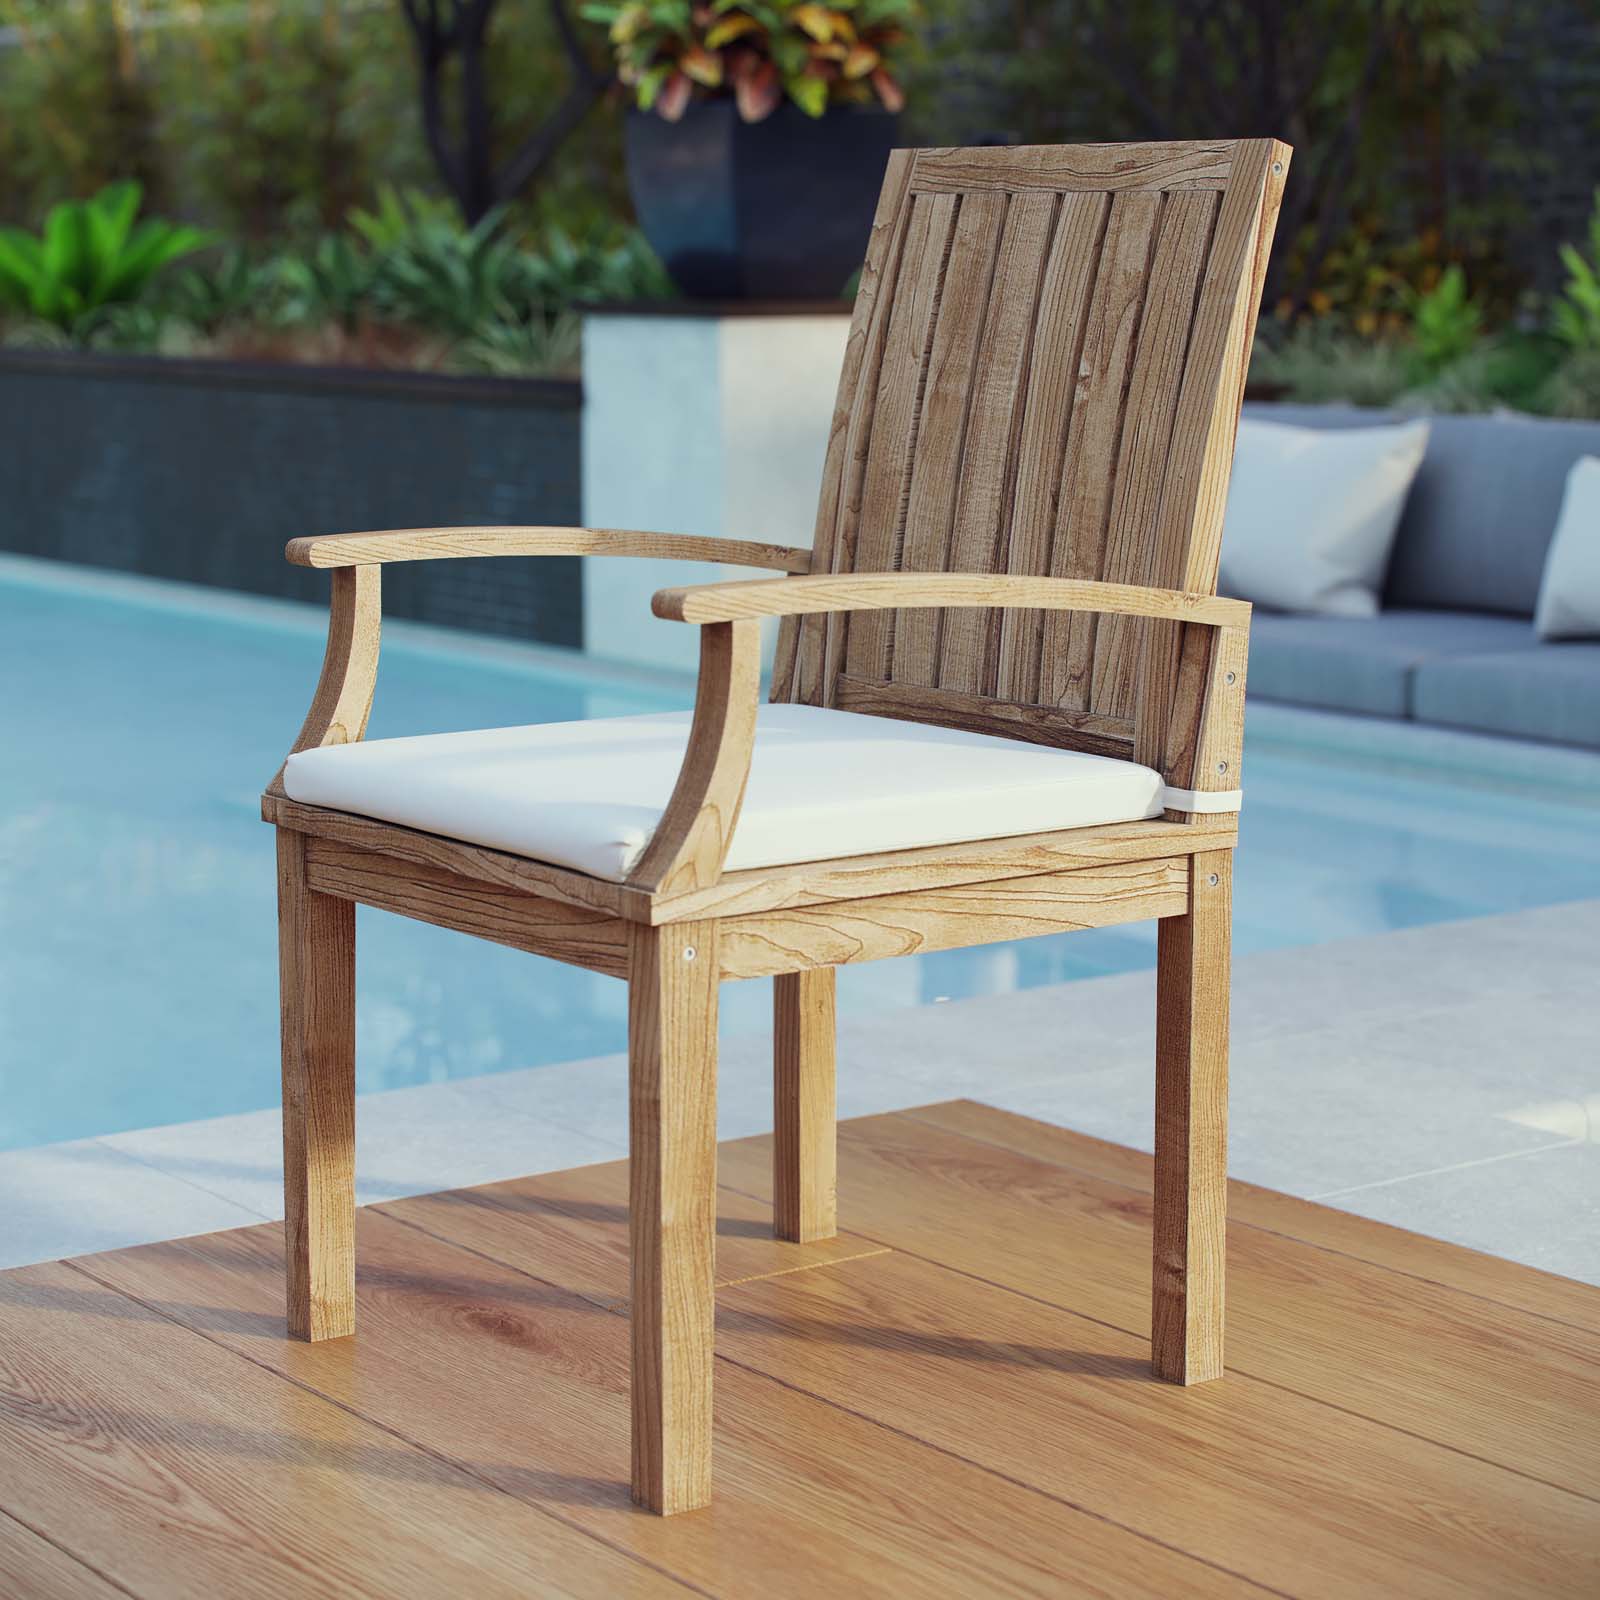 Marina Outdoor Patio Teak Dining Chair-Outdoor Dining Chair-Modway-Wall2Wall Furnishings